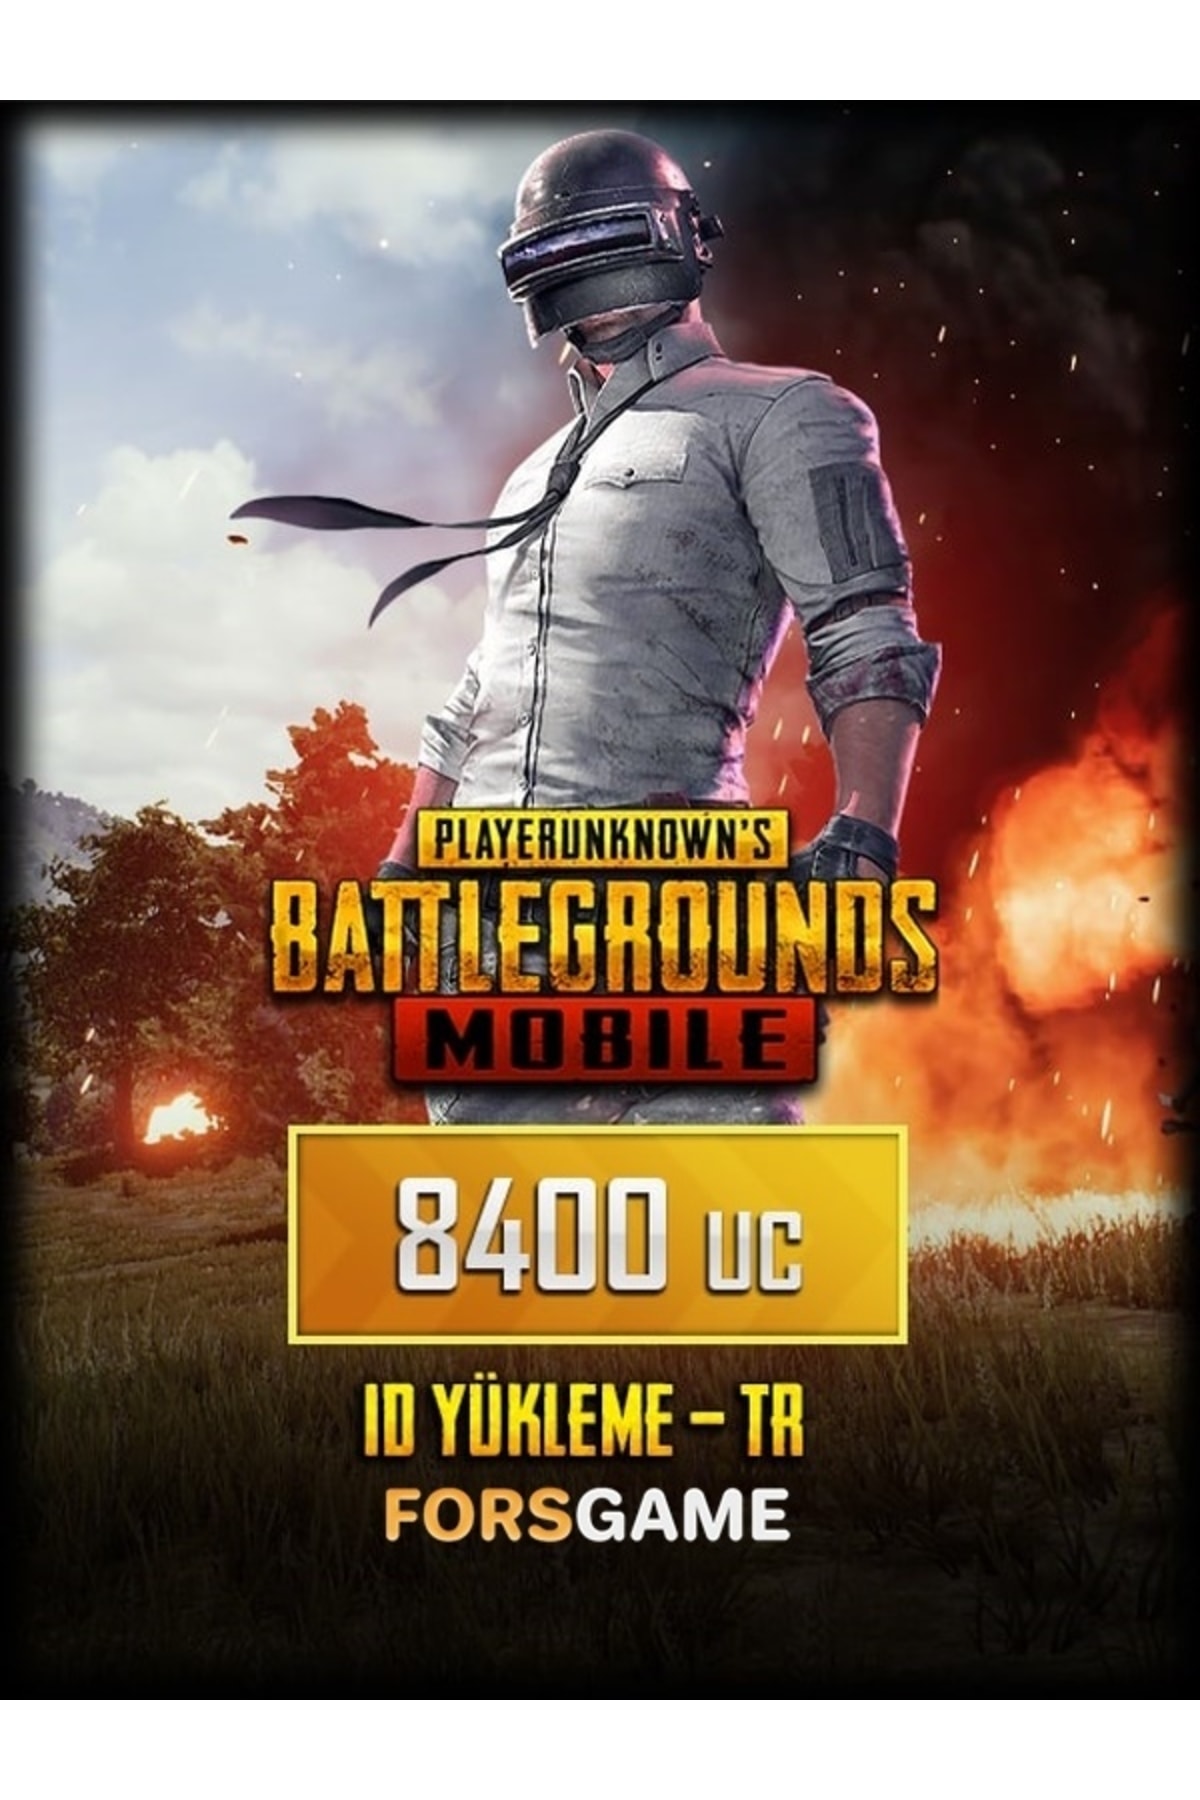 fors game Pubg Mobile 8400 Uc Id Yükleme Tr